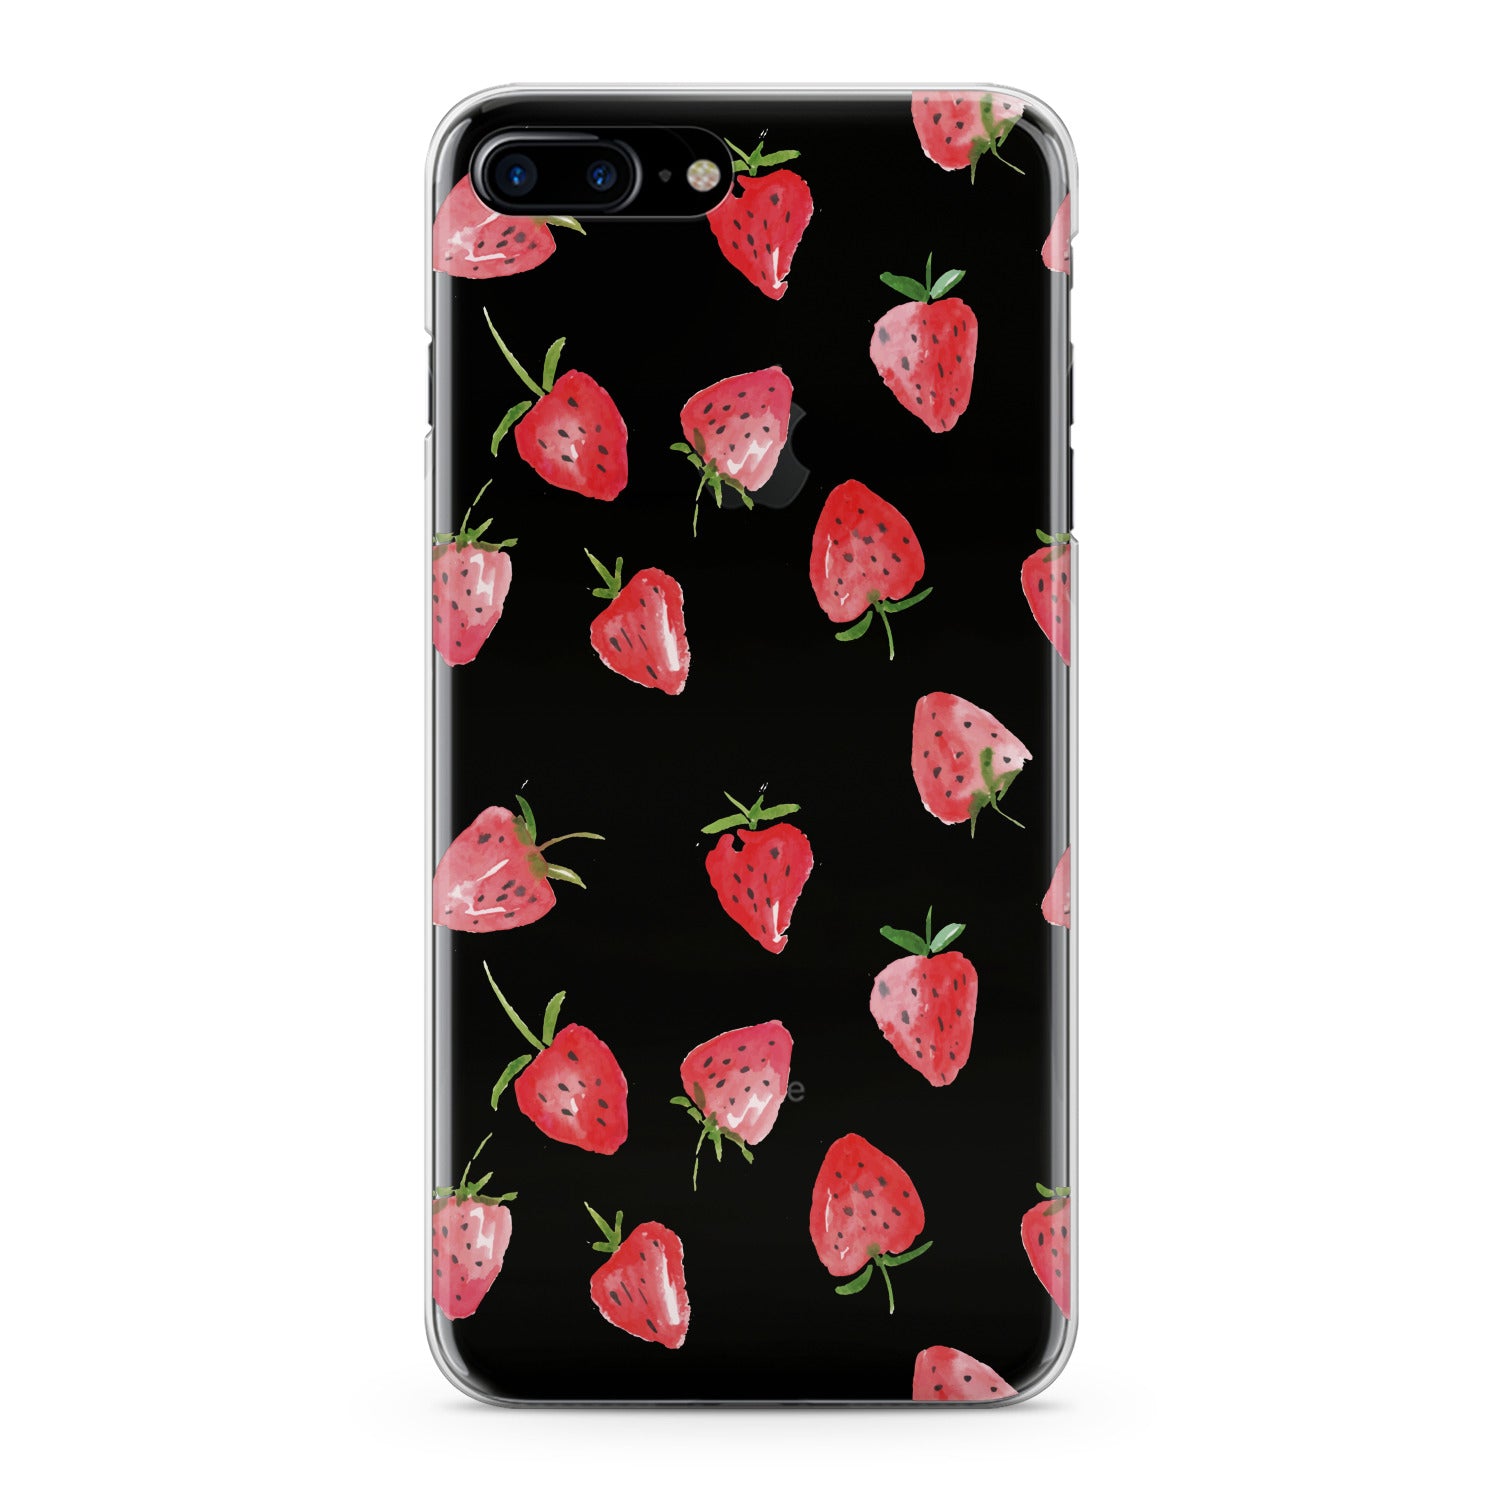 Lex Altern Painted Strawberries Phone Case for your iPhone & Android phone.